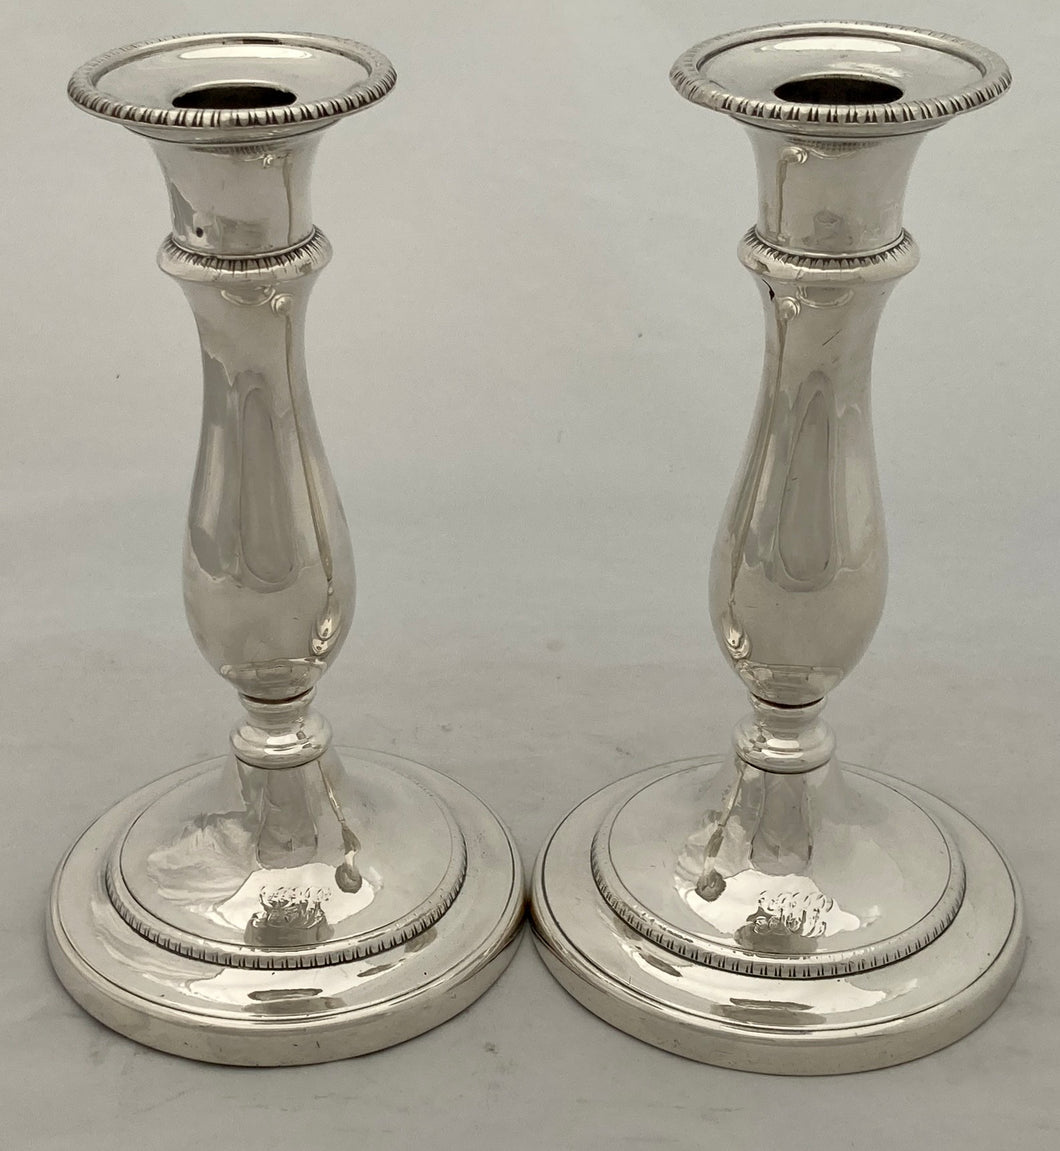 Georgian, George IV, Pair of Silver Candlesticks. Sheffield 1826 Smith, Tate & Co.